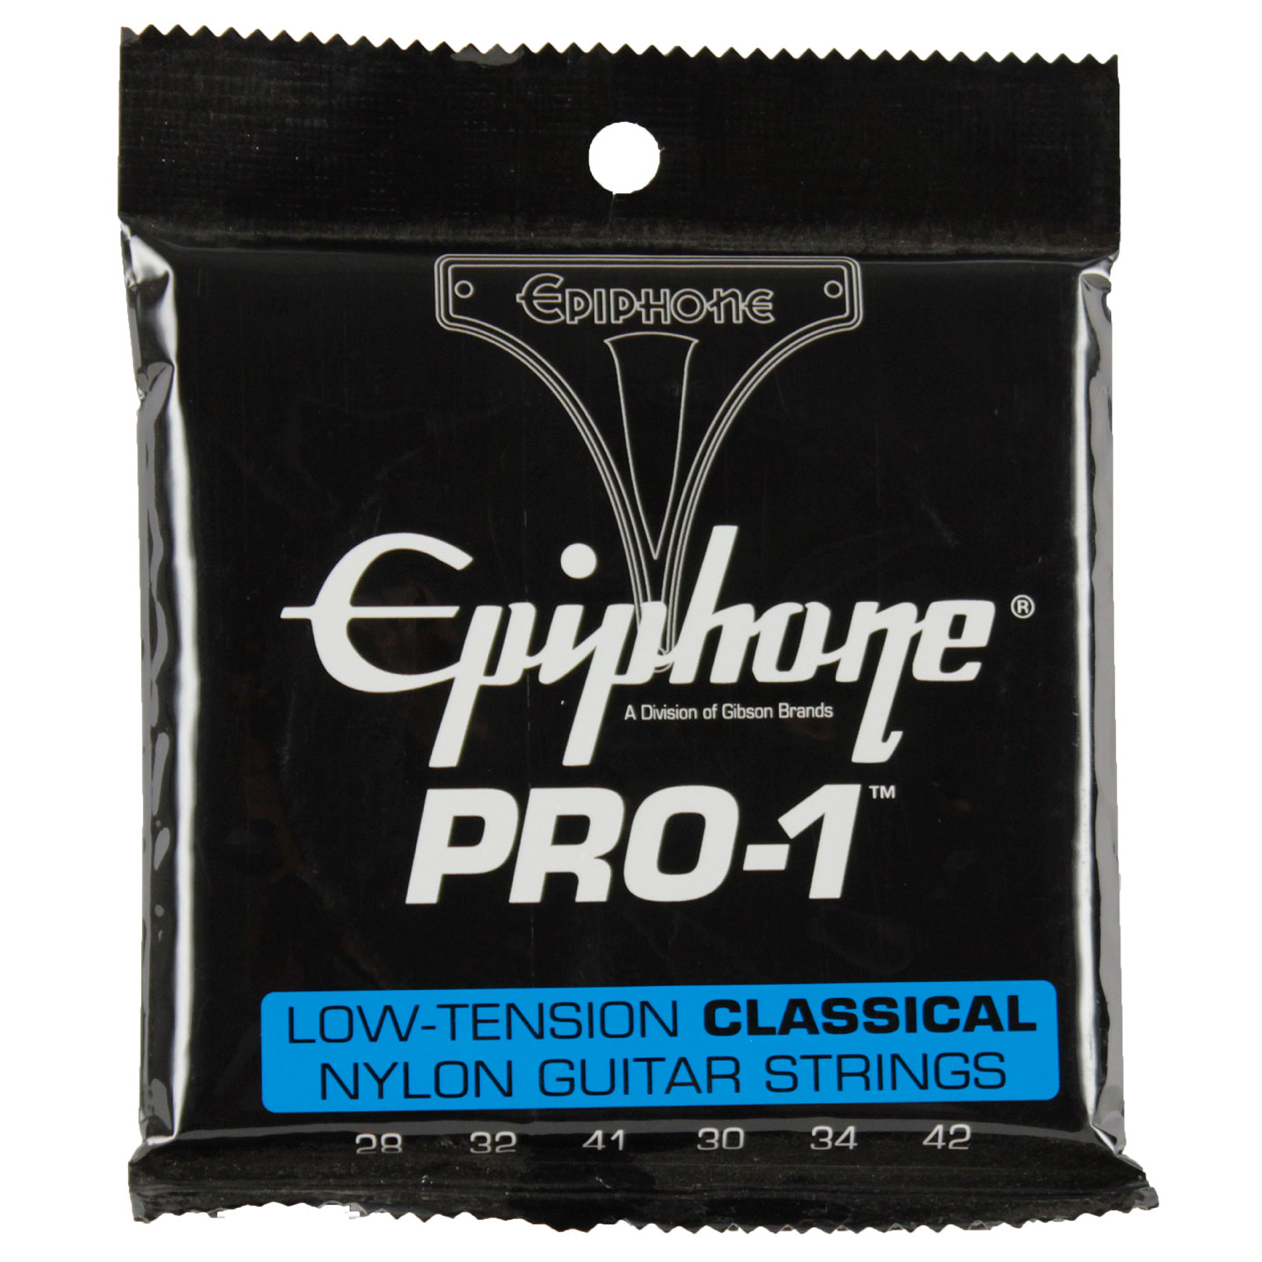 Epiphone PRO-1 Classical Strings